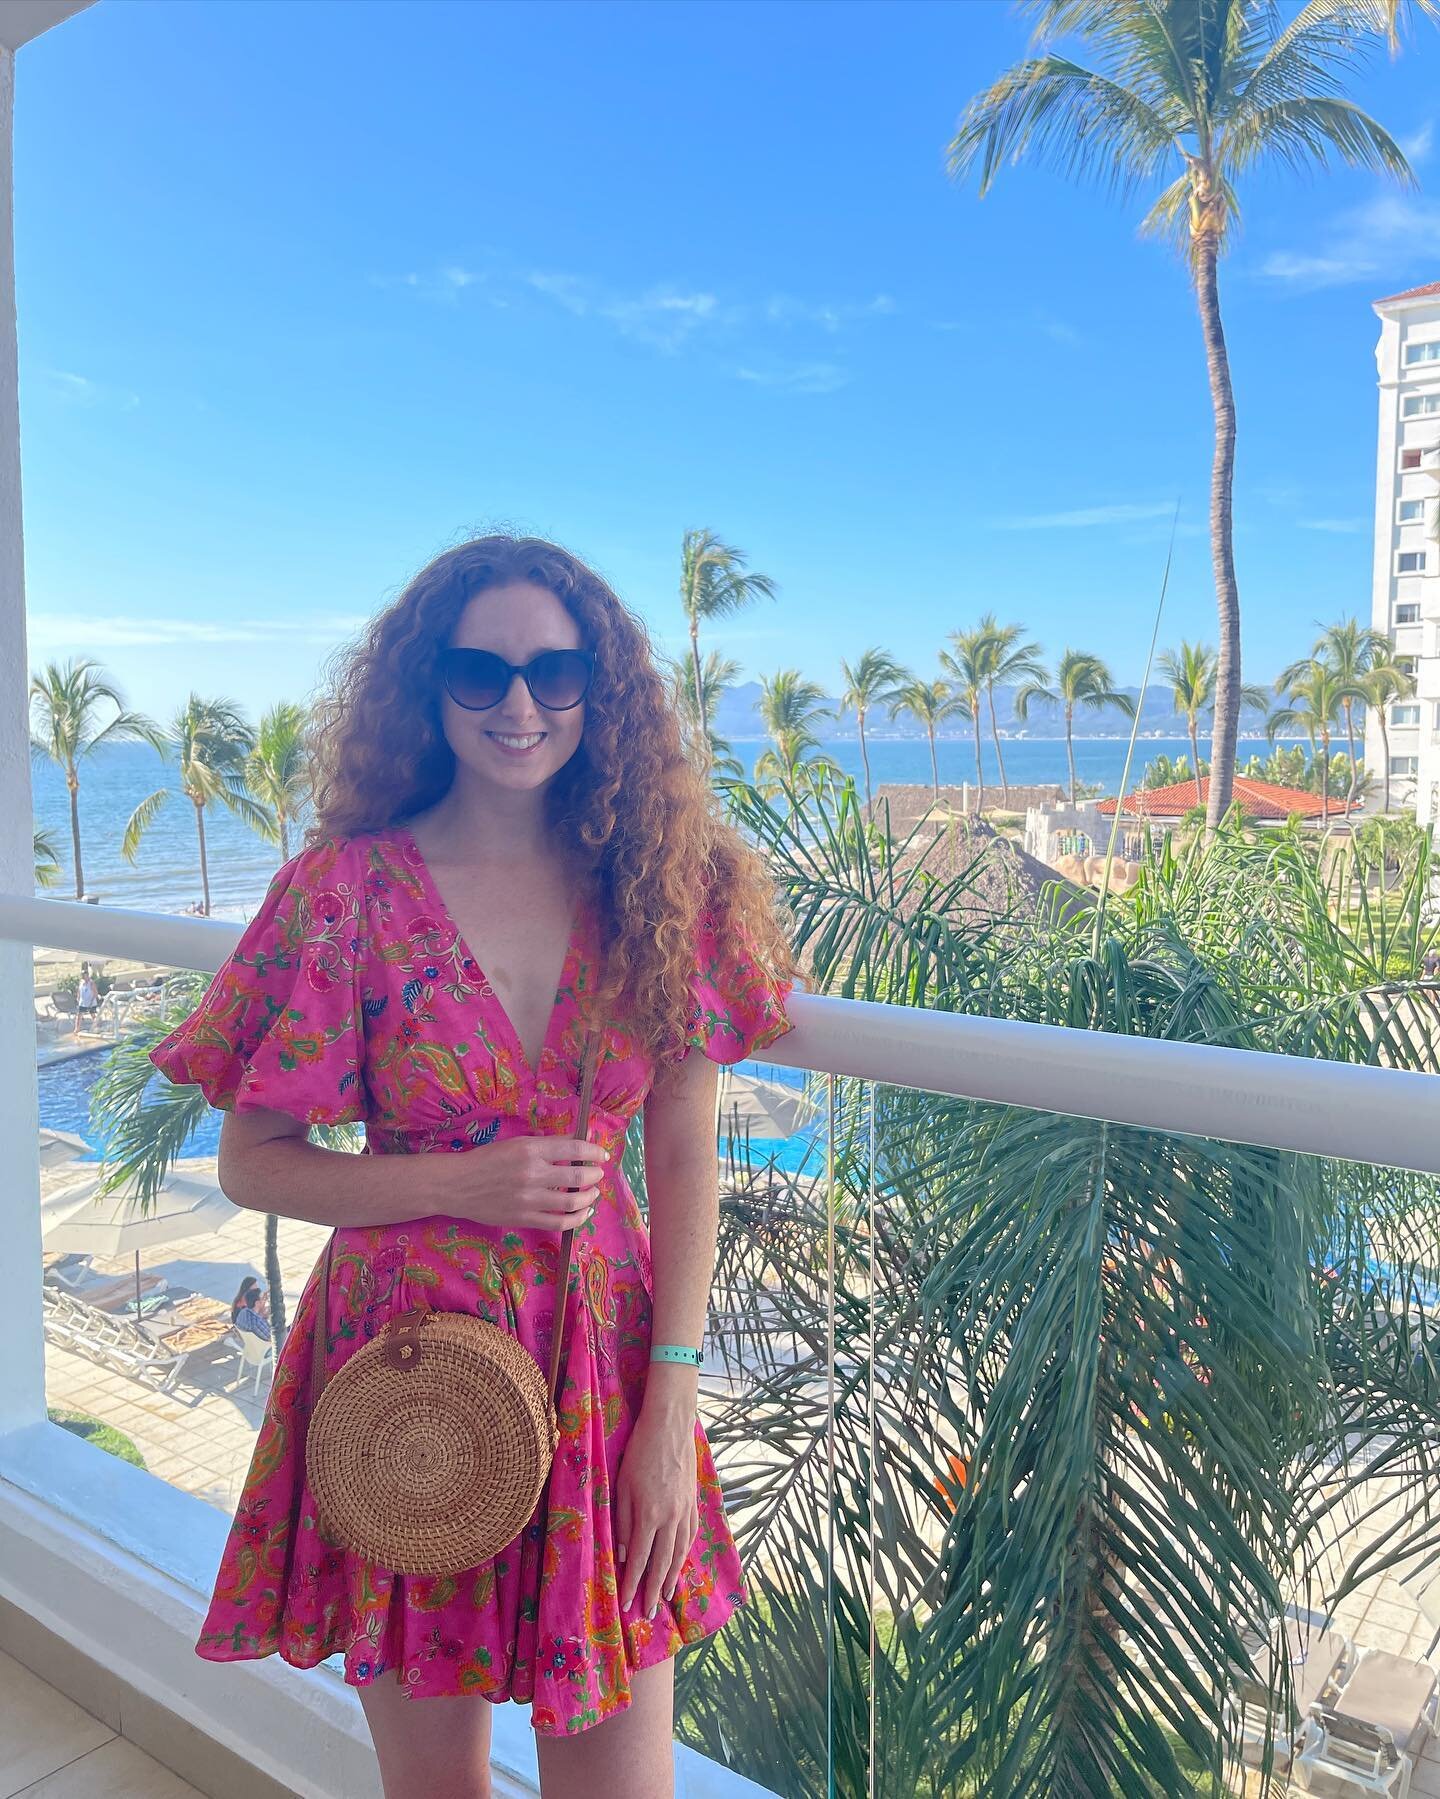 A recap of our first day @marivalemotions in @riviera_nayarit ☀️🌴a beautiful resort with everything you could possibly need. Lots of pools, restaurants, shows, yoga, activities, cocktails, lounge chairs, cabanas on the beach and more. Look at that b